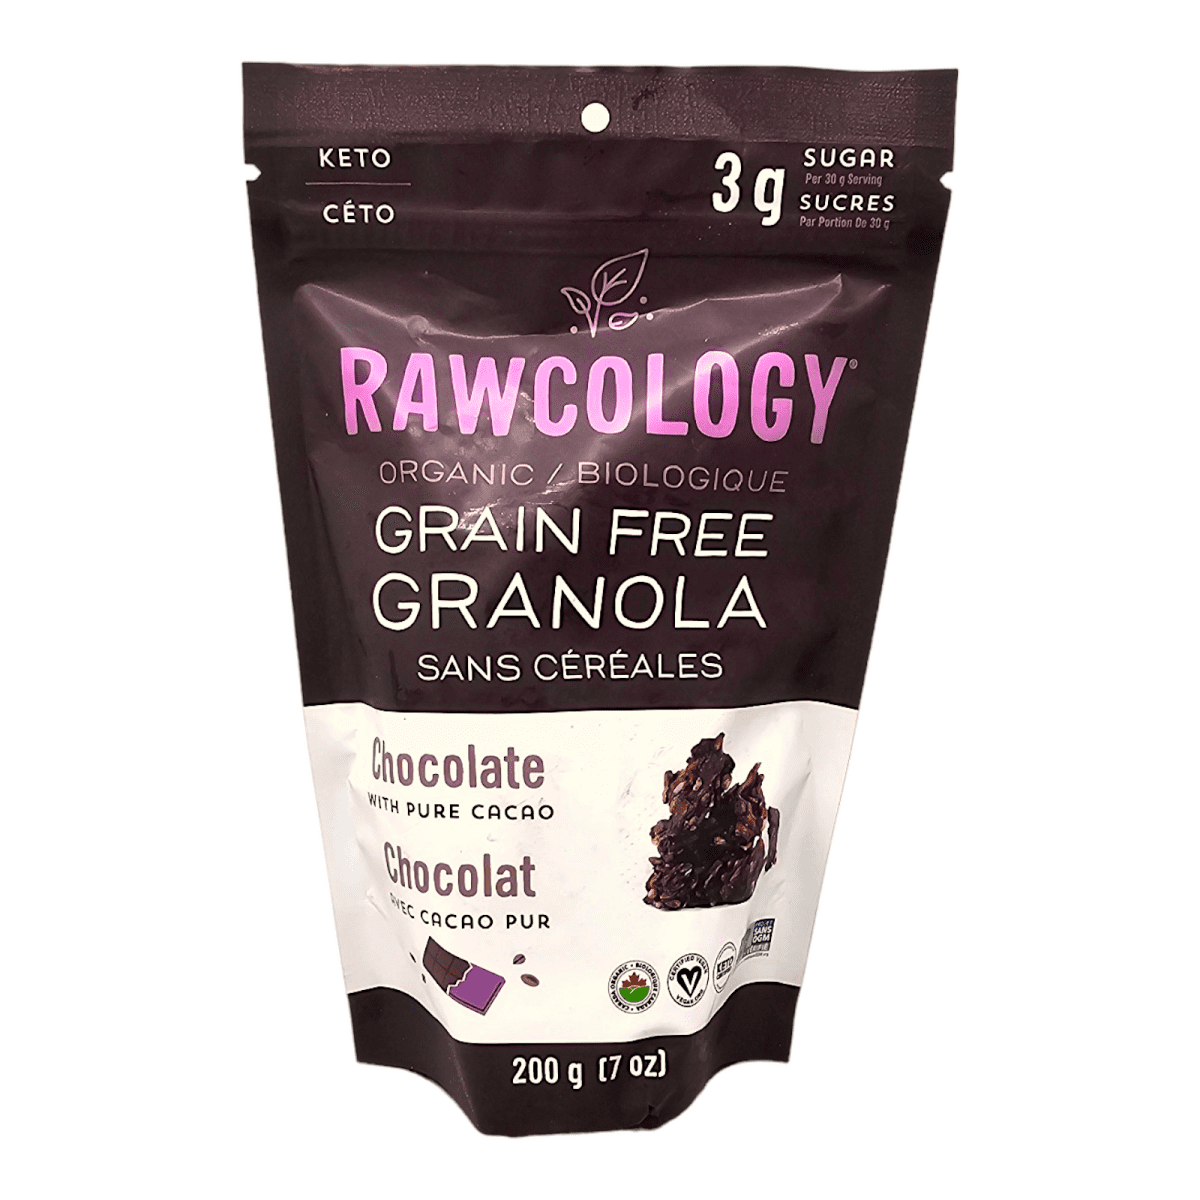 Rawcology Organic Chocolate with pure Cacao (200g)